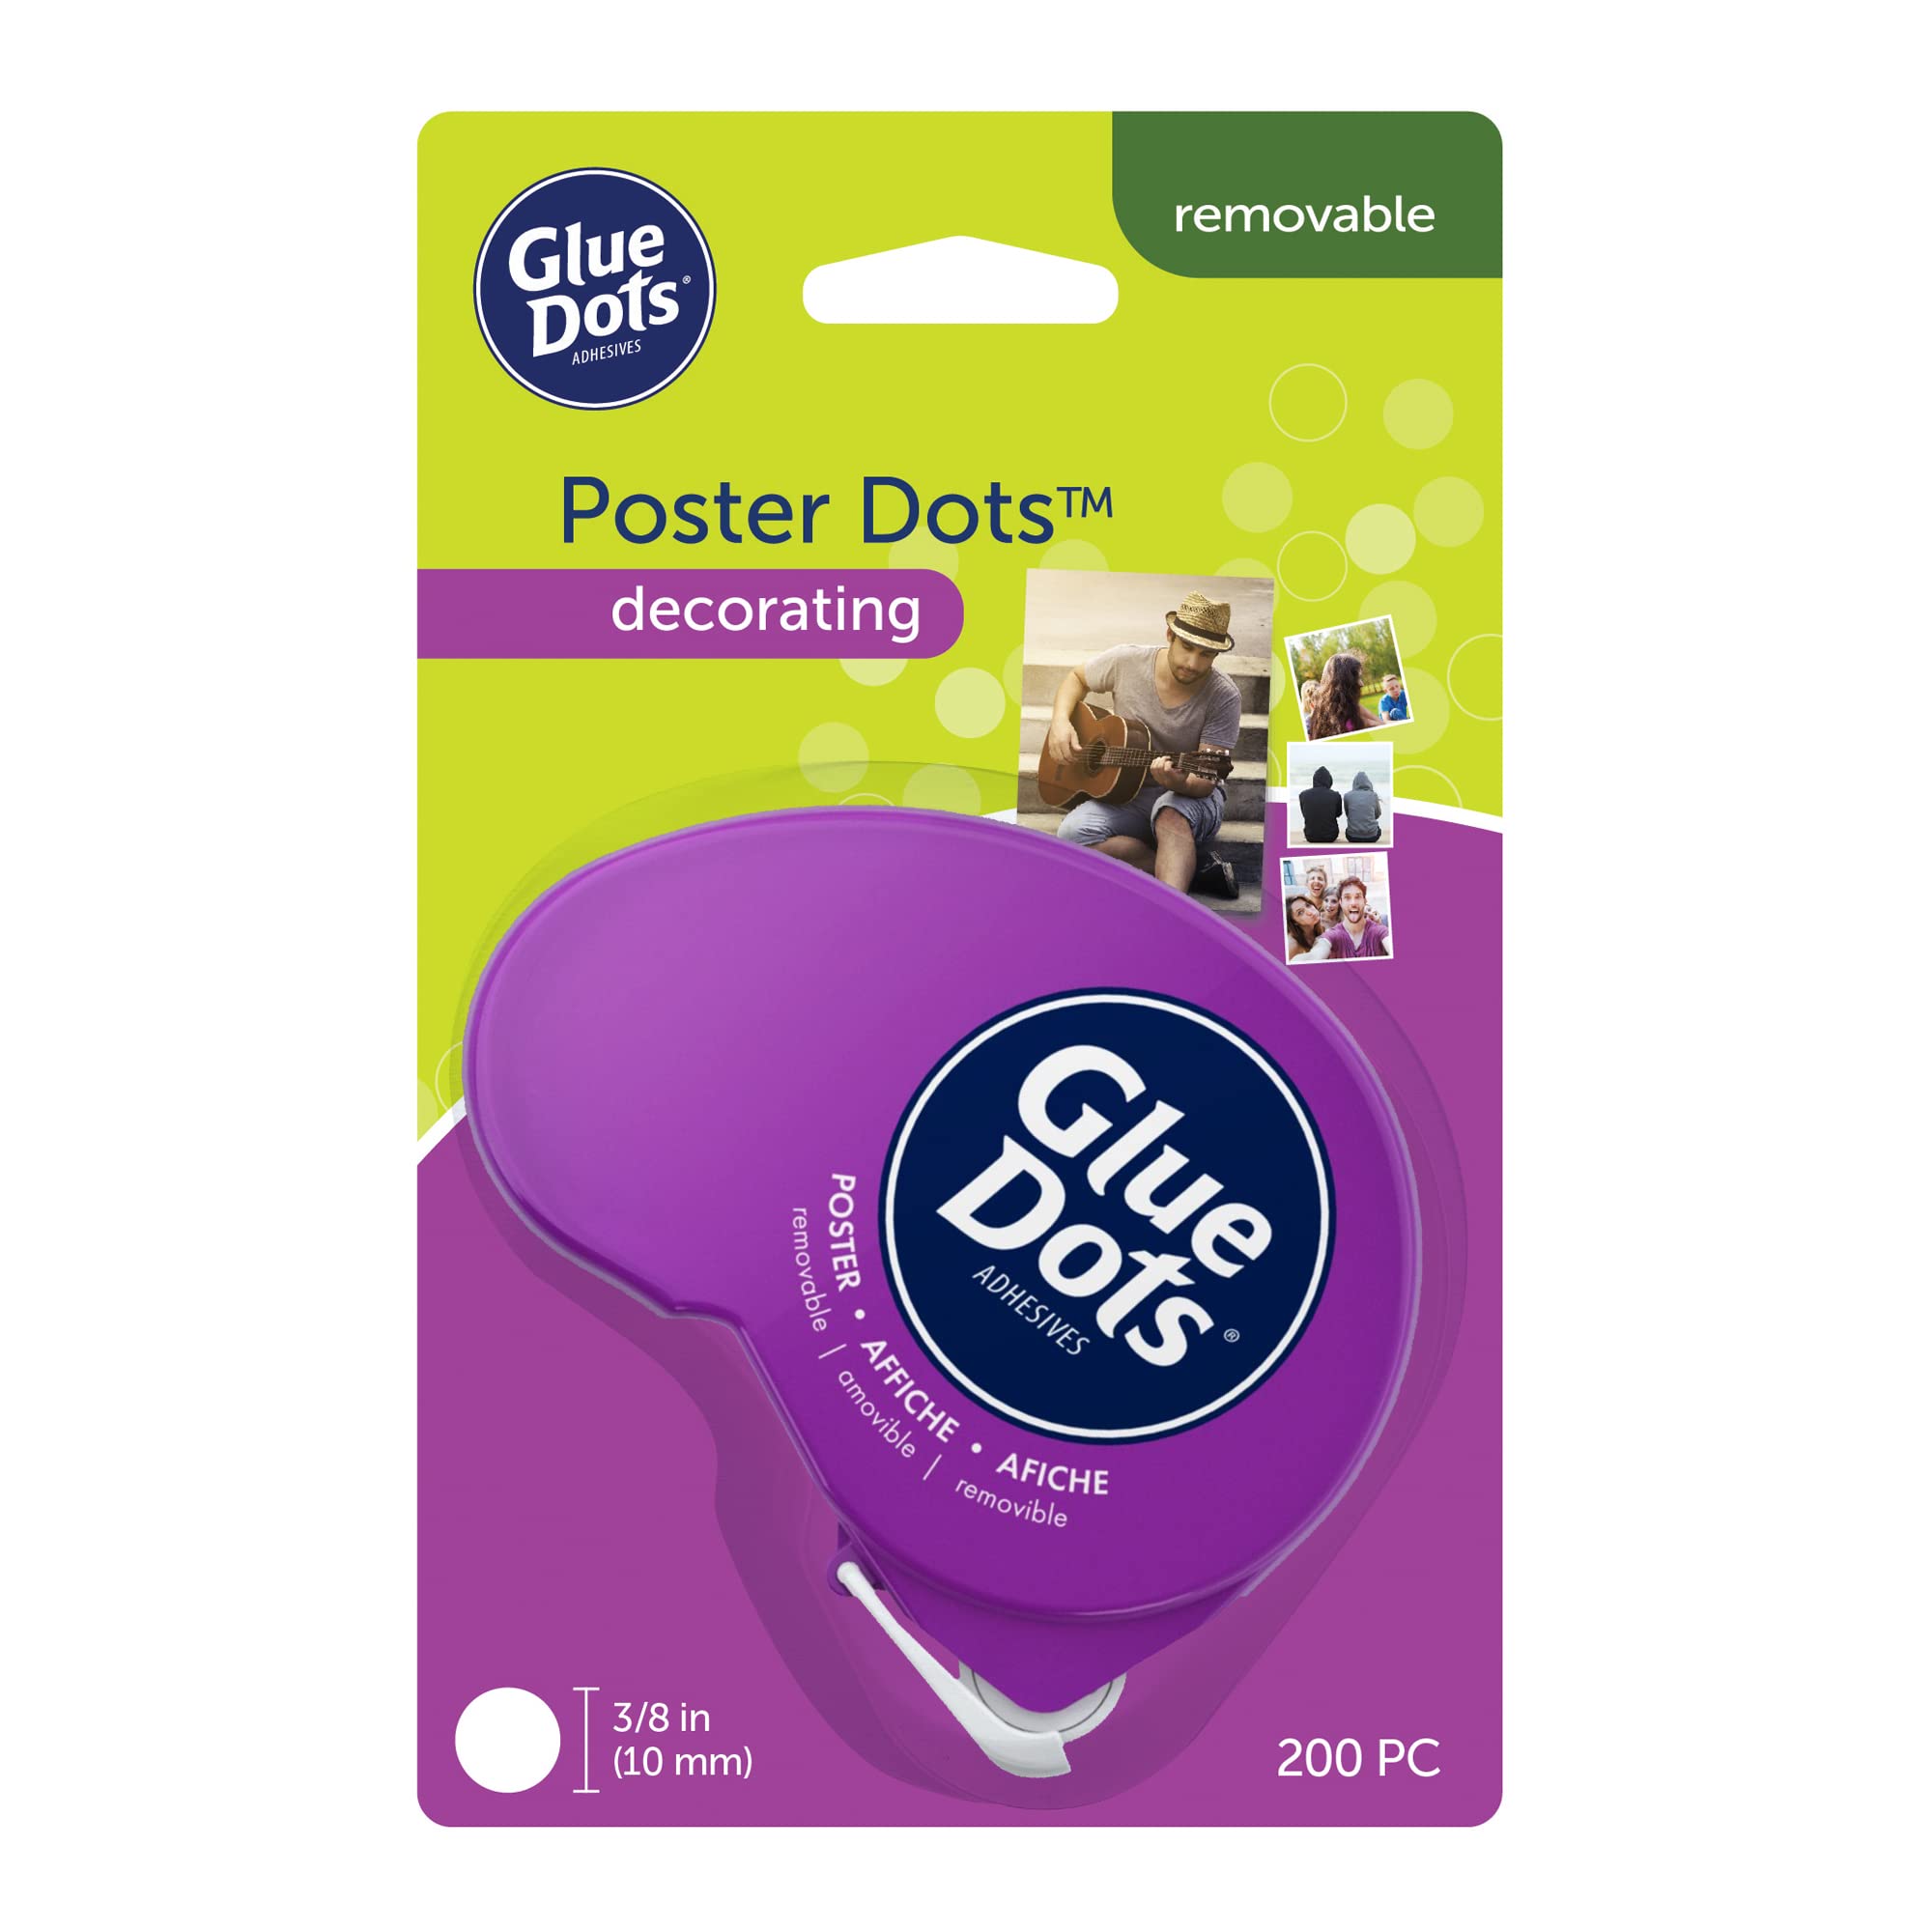 Glue Dots Dot N' Go Glue Dot Dispenser with 200 Removable Double-Sided  Adhesive Poster Dots 3/8-Inch Clear 1 Pack 1 Pack Poster Dots Dispenser